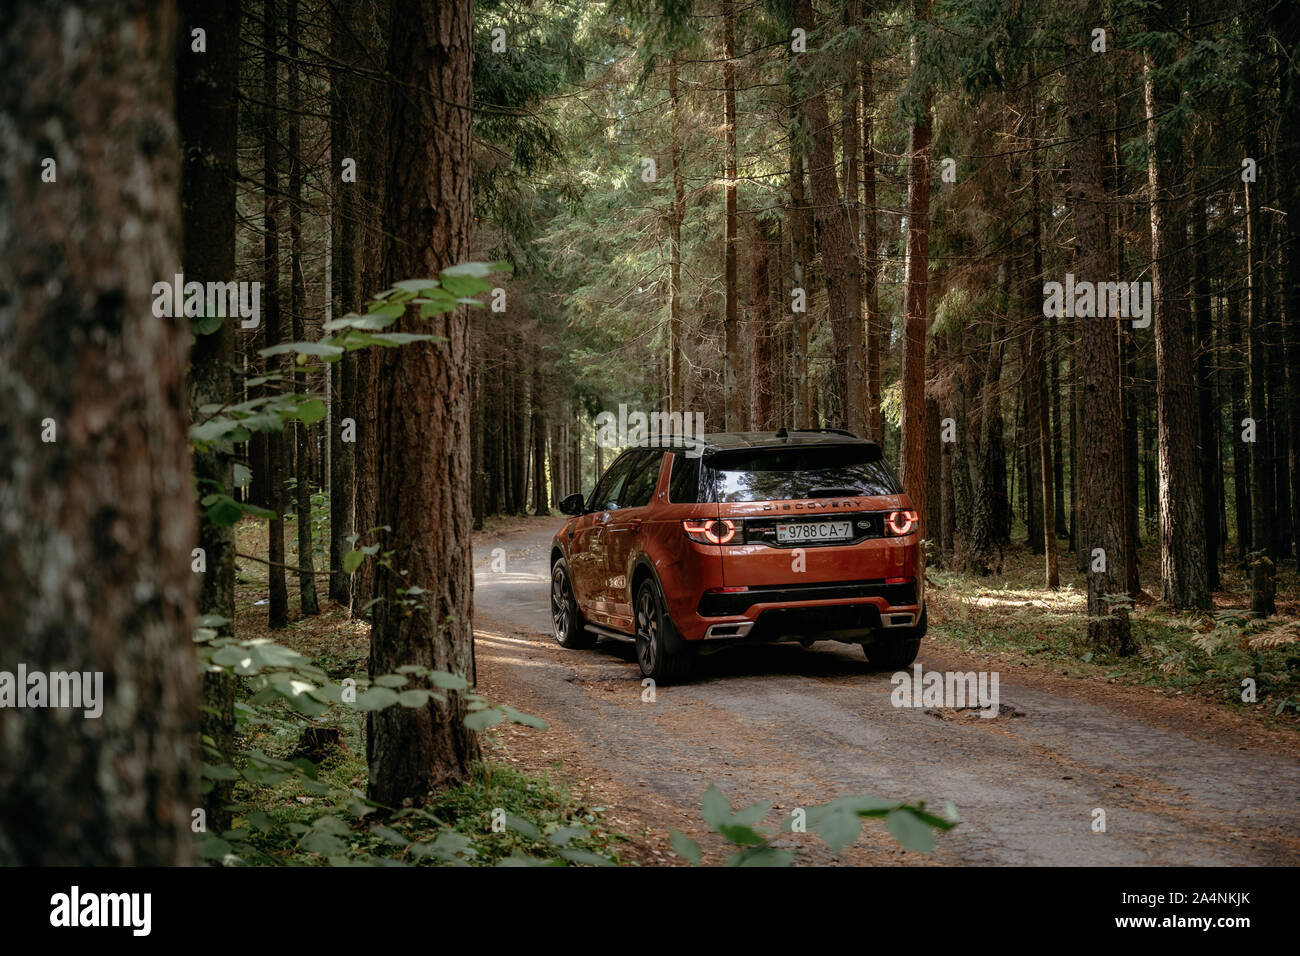 Minsk, Belarus - September 24, 2019: Land Rover Discovery Sport on country road n autumn forest landscape. Stock Photo